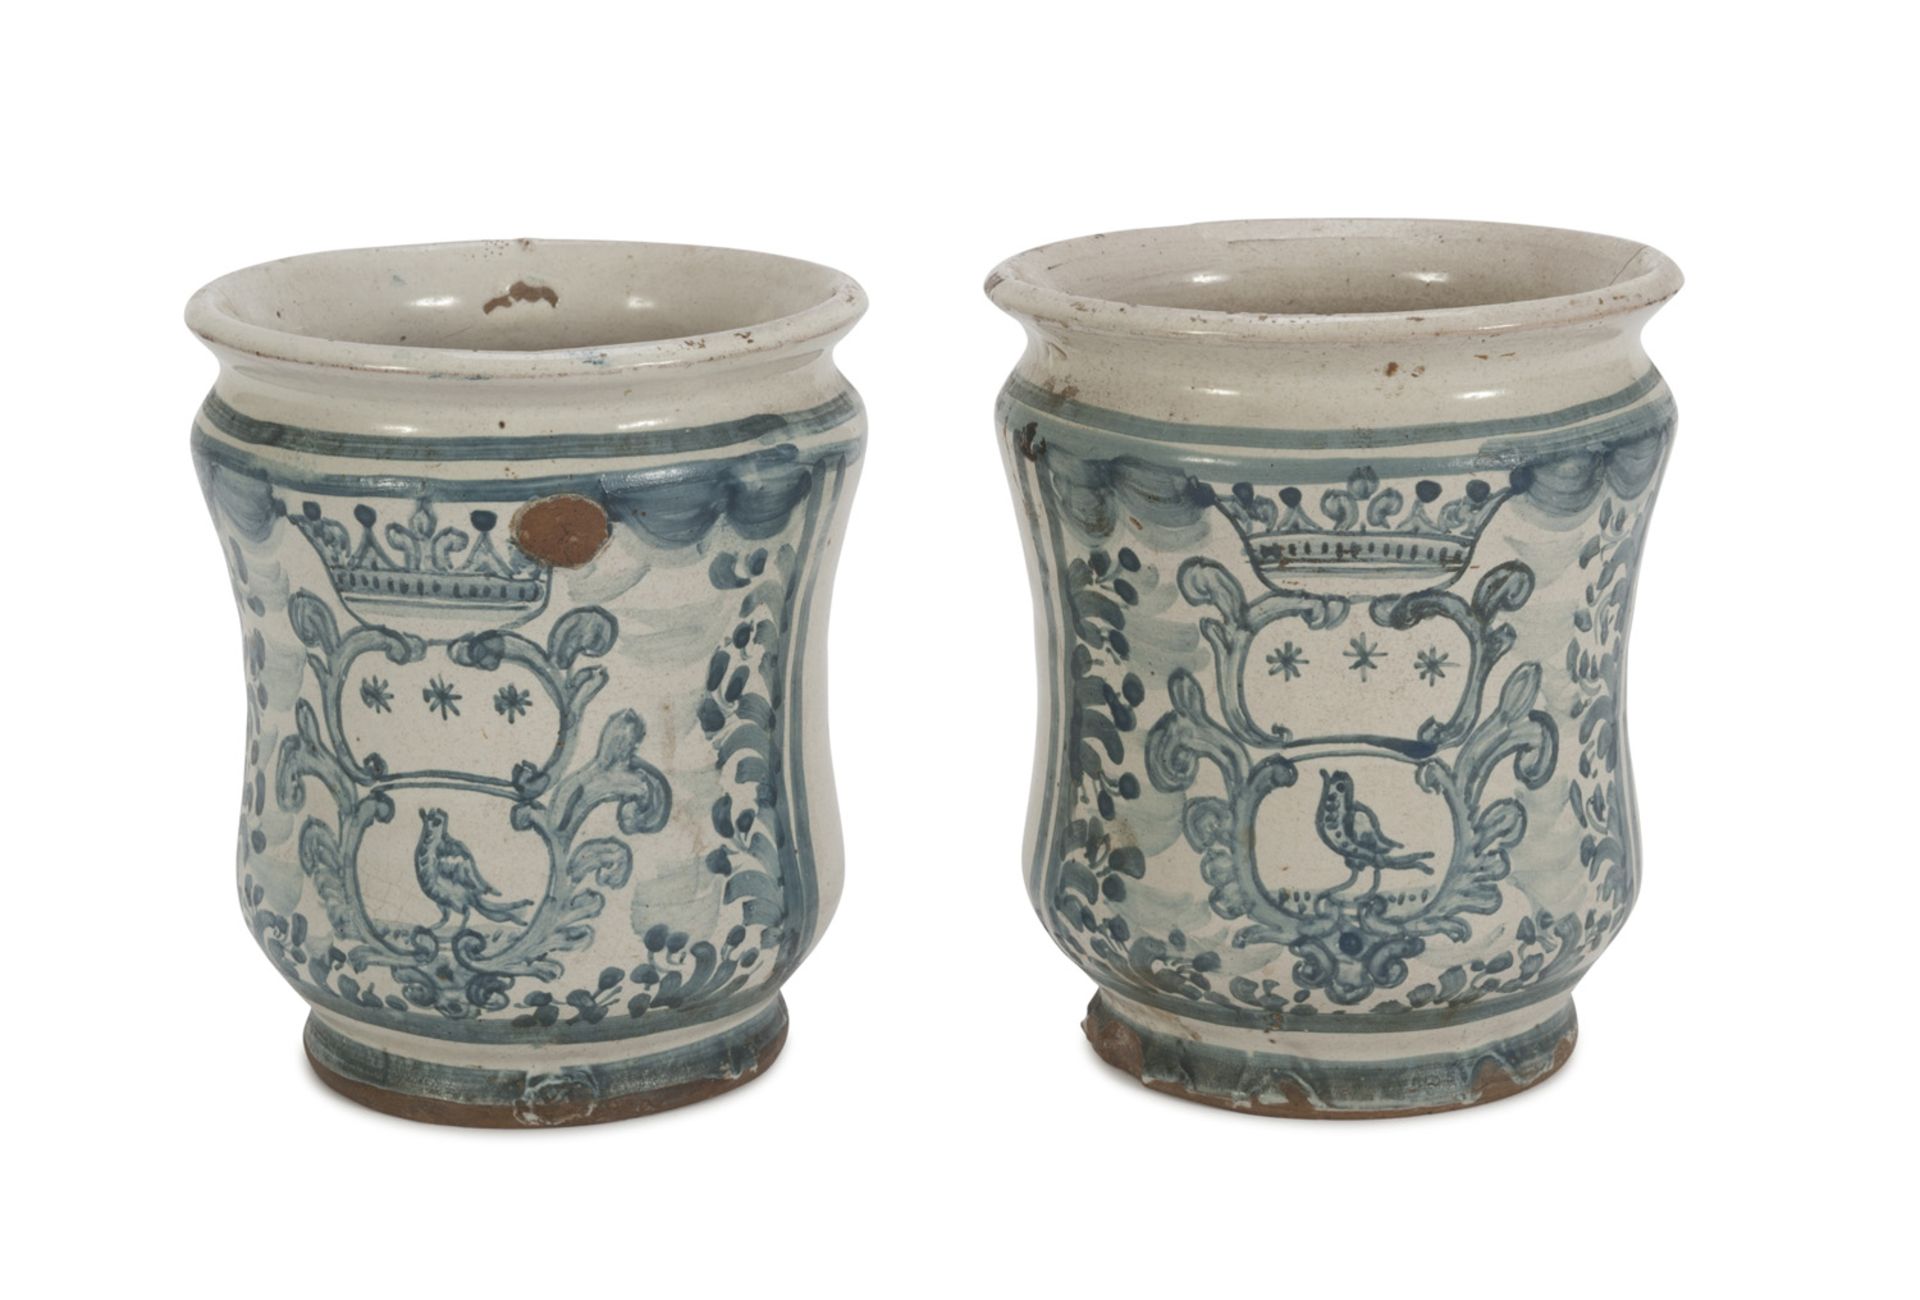 A PAIR OF SMALL PHARMACY VASES IN MAIOLICA, CAMPANIAN WORKSHOP 18TH CENTURY in white and blue